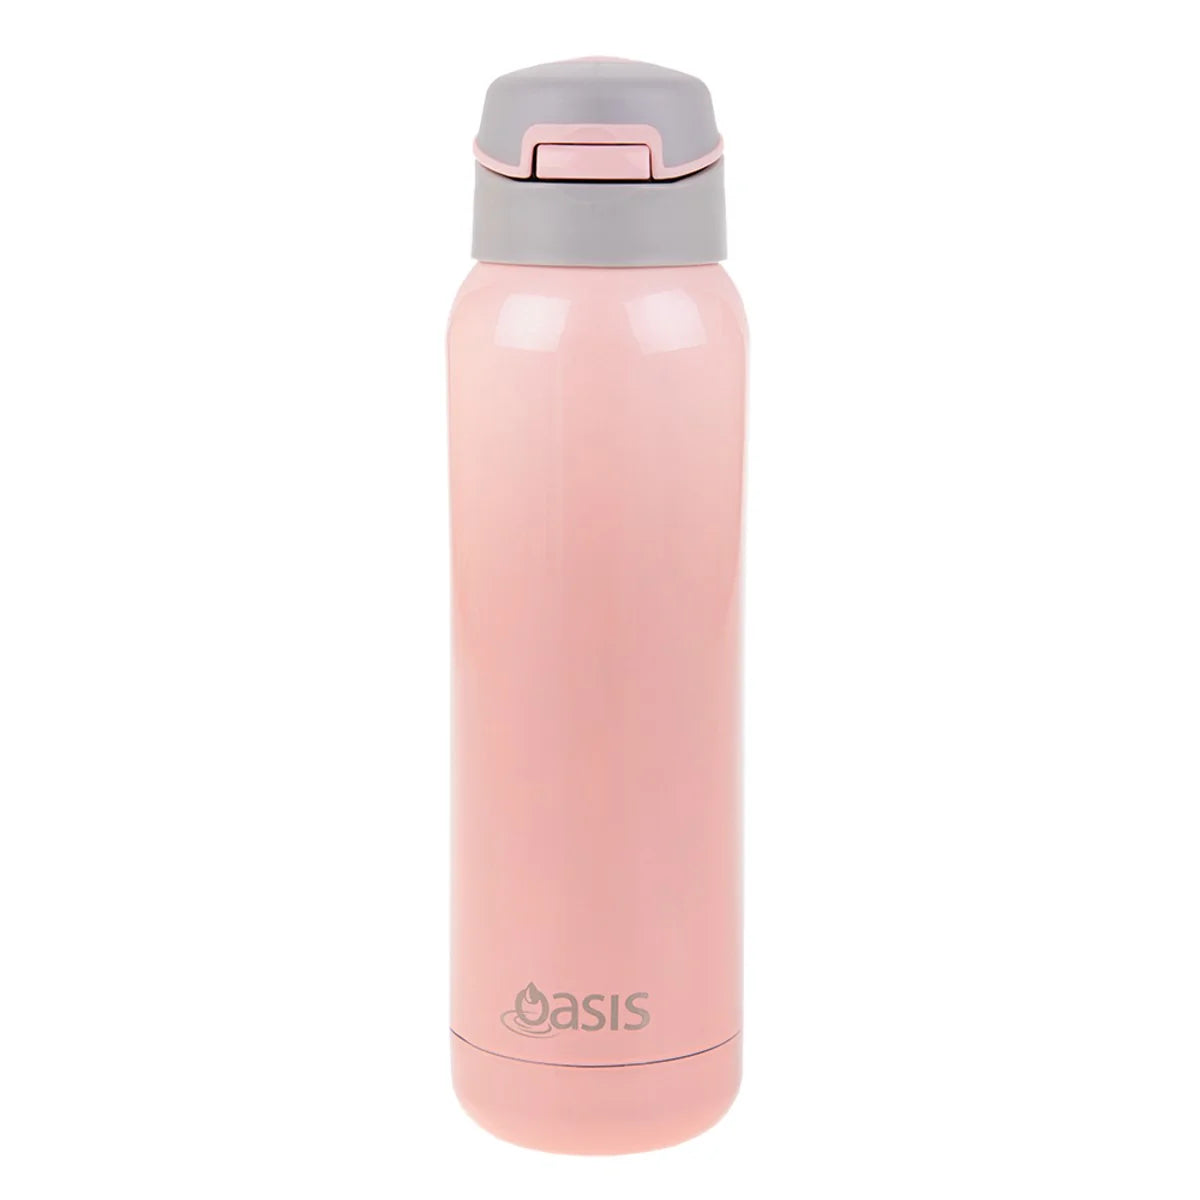 Oasis Insulated Drink Bottle With Straw 500ml